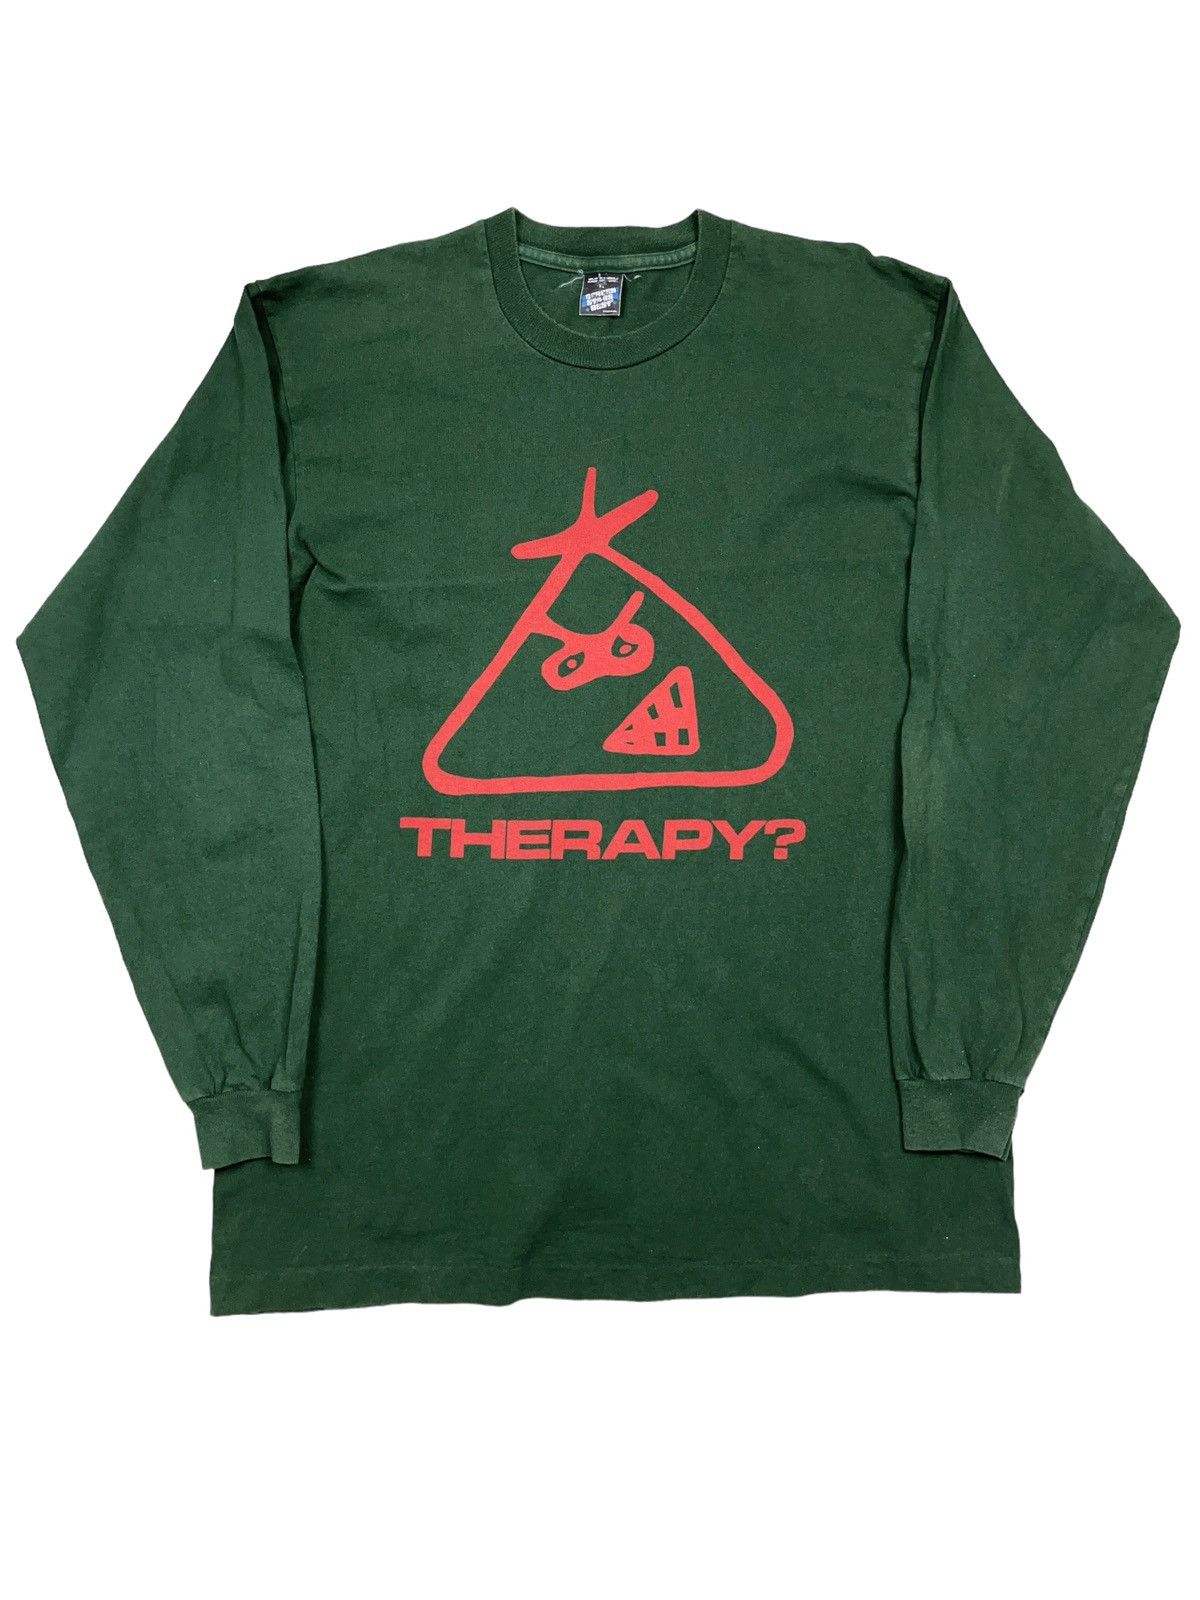 Vintage Vintage 90s Therapy? Long Sleeve Shirt | Grailed